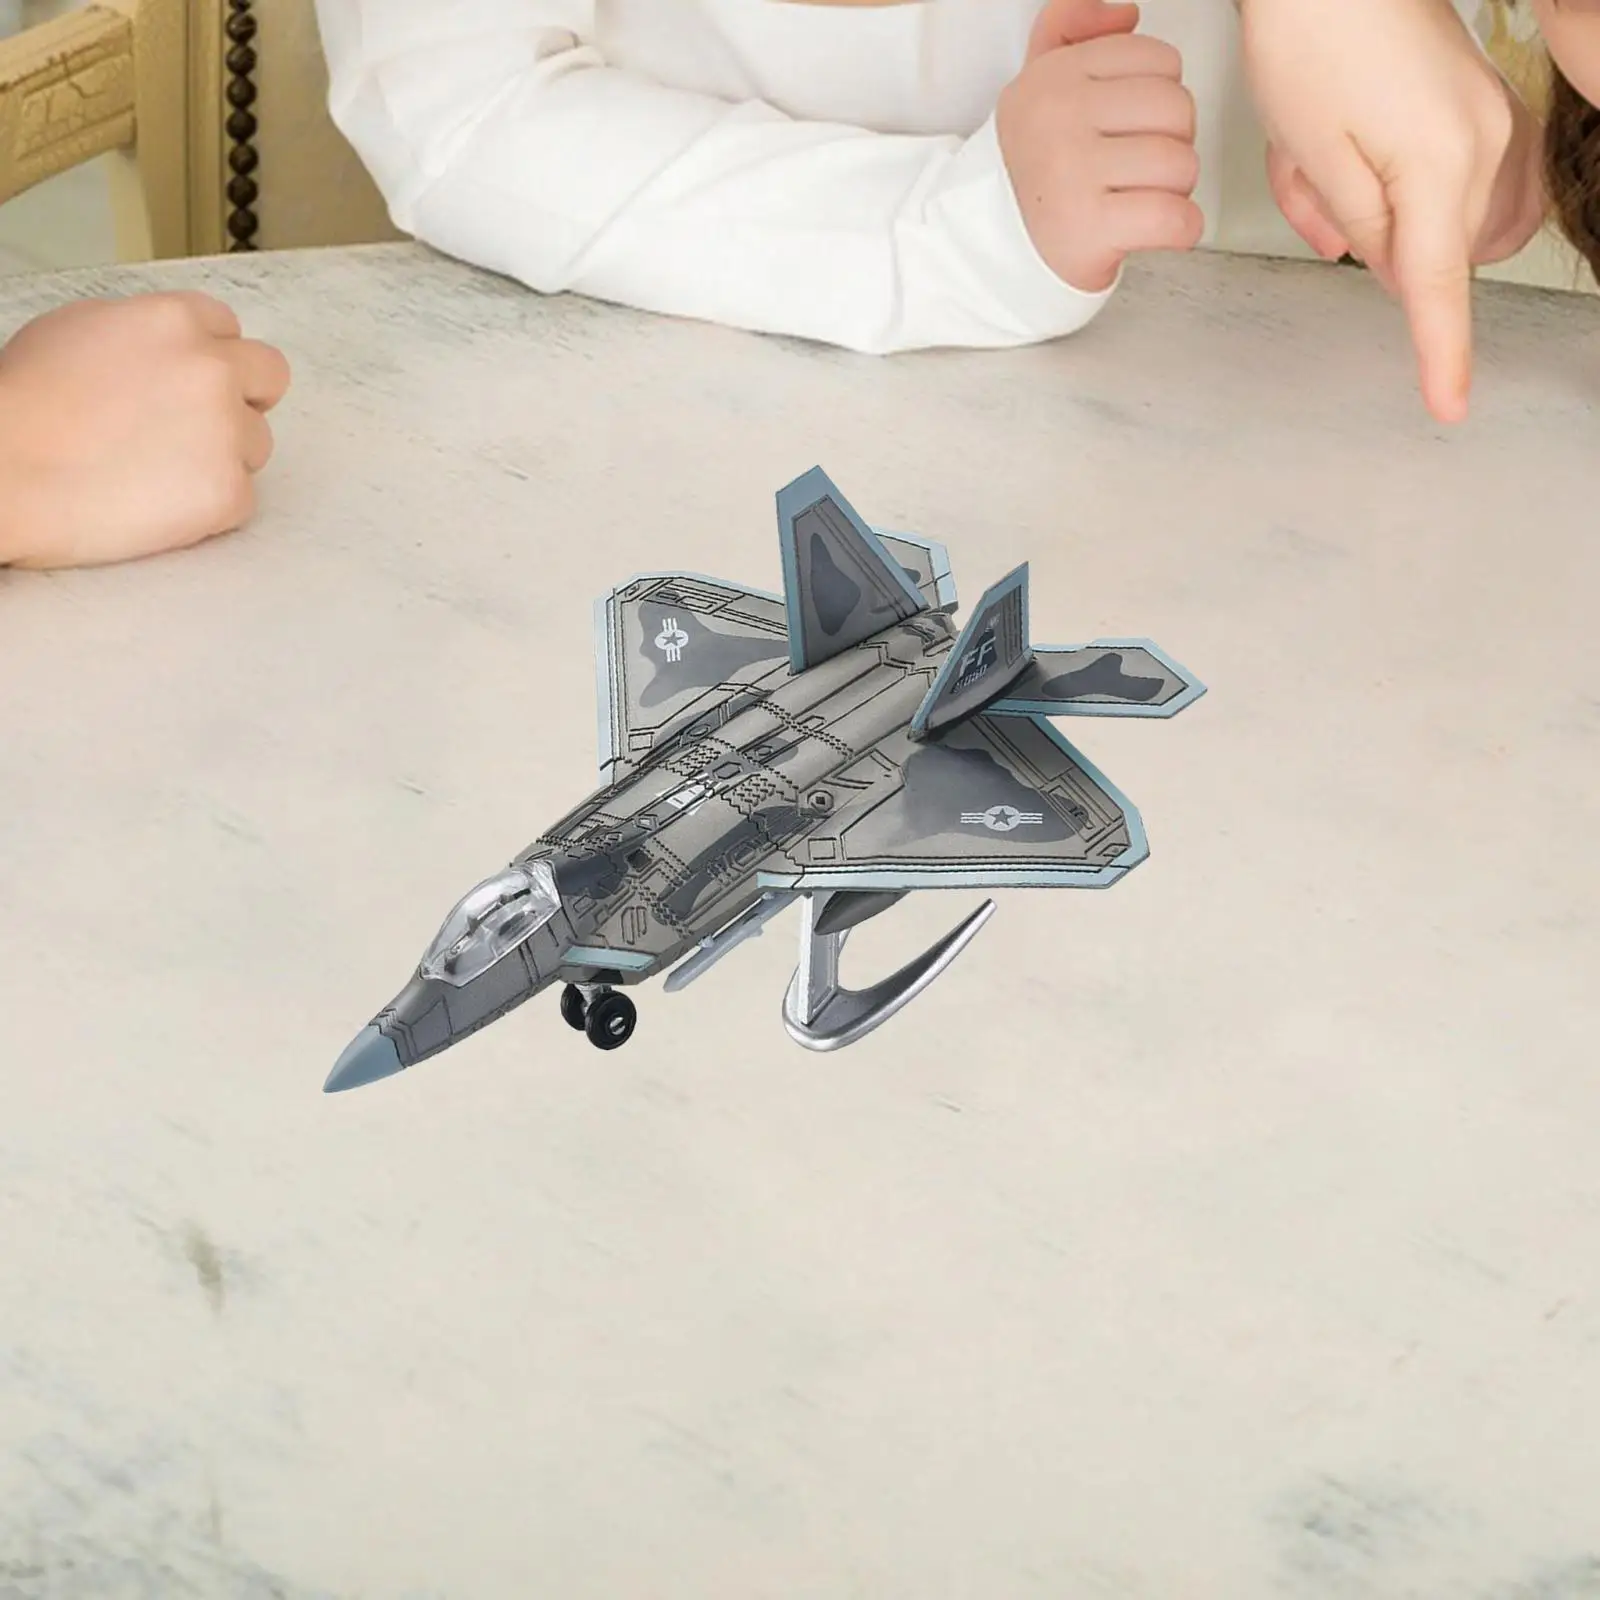 1/72 Fighter Model 3D Puzzle DIY Assemble Simulation Collectible Plane Model Brain Teaser for Adults Girls Children Gifts